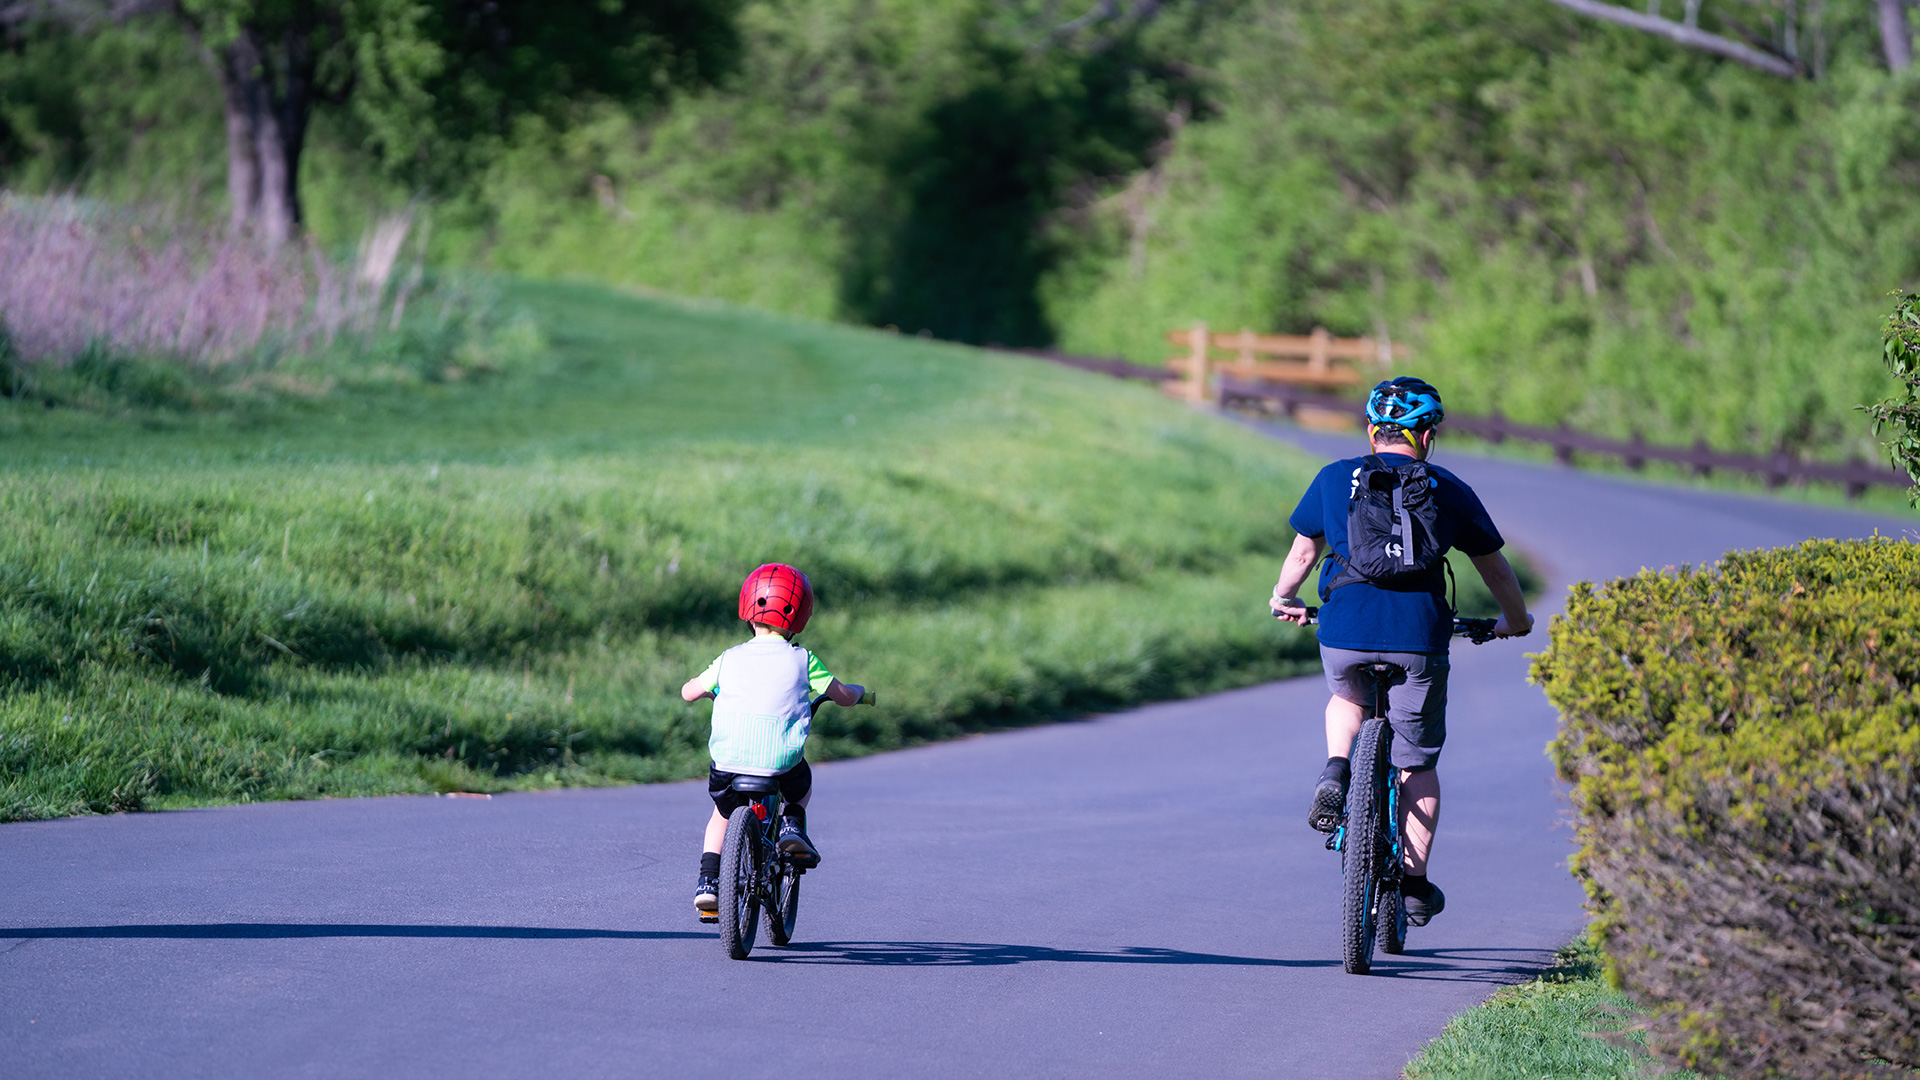 Parent and Child Riding Bikes on Multi-Use Path